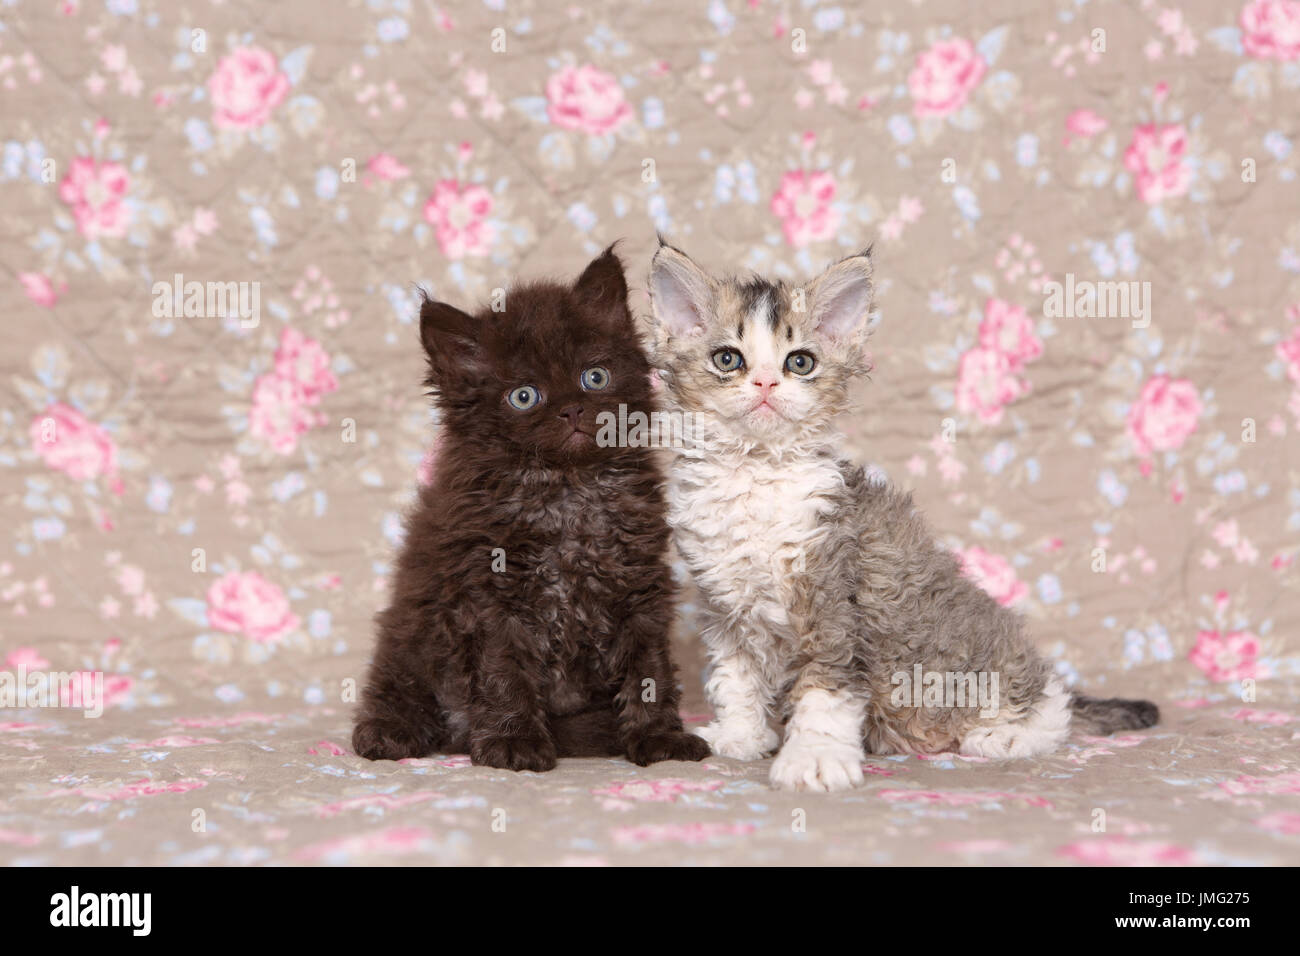 Selkirk Rex. Two kittens (6 weeks old) sitting. Studio picture seen against a floral design wallpaper. Germany Stock Photo